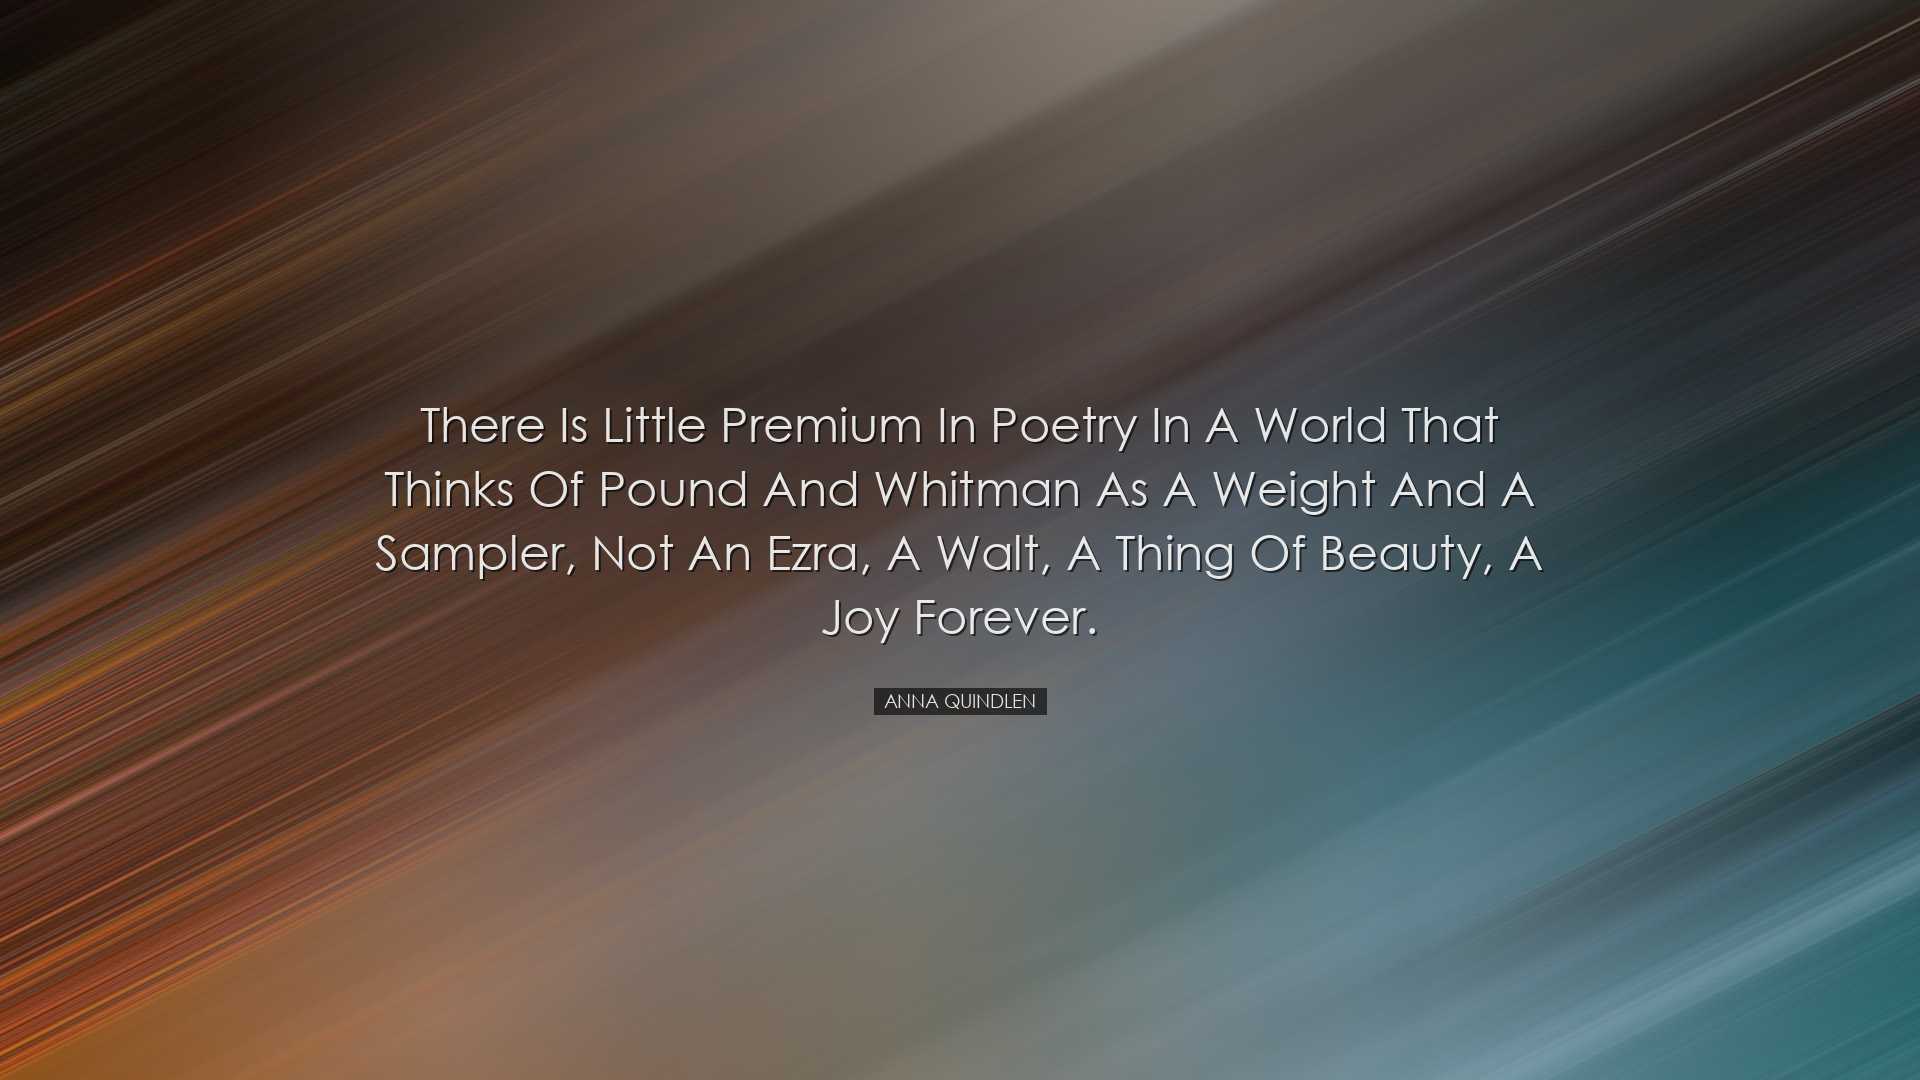 There is little premium in poetry in a world that thinks of Pound